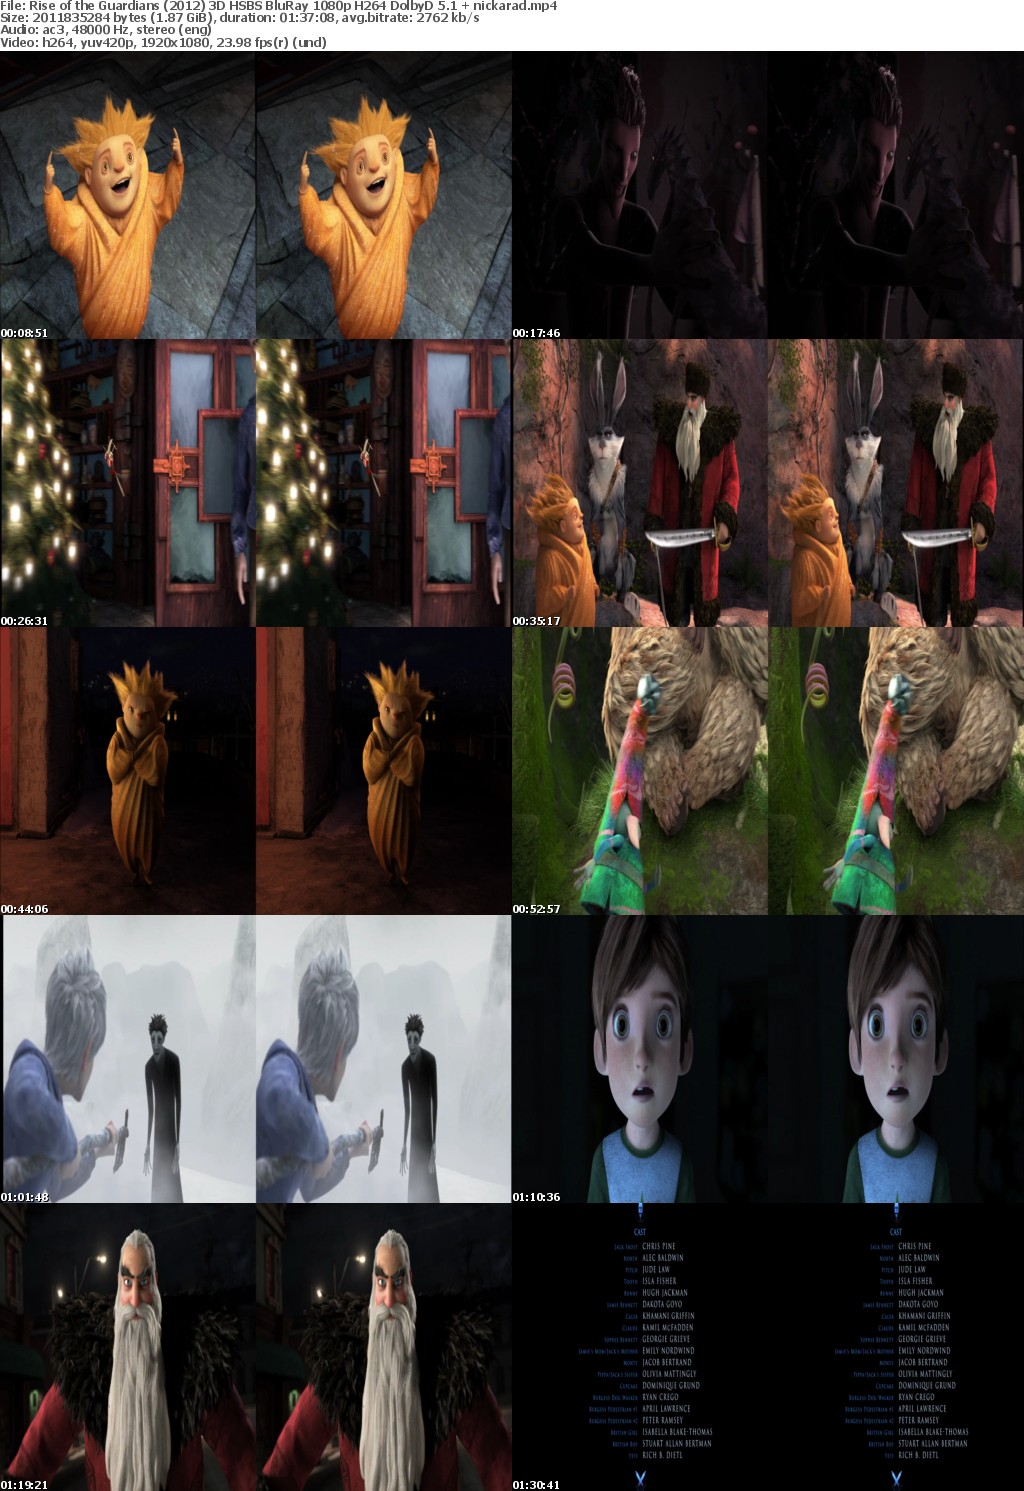 Rise of the Guardians (2012) 3D HSBS BluRay 1080p H264 DolbyD 5 1 nickarad